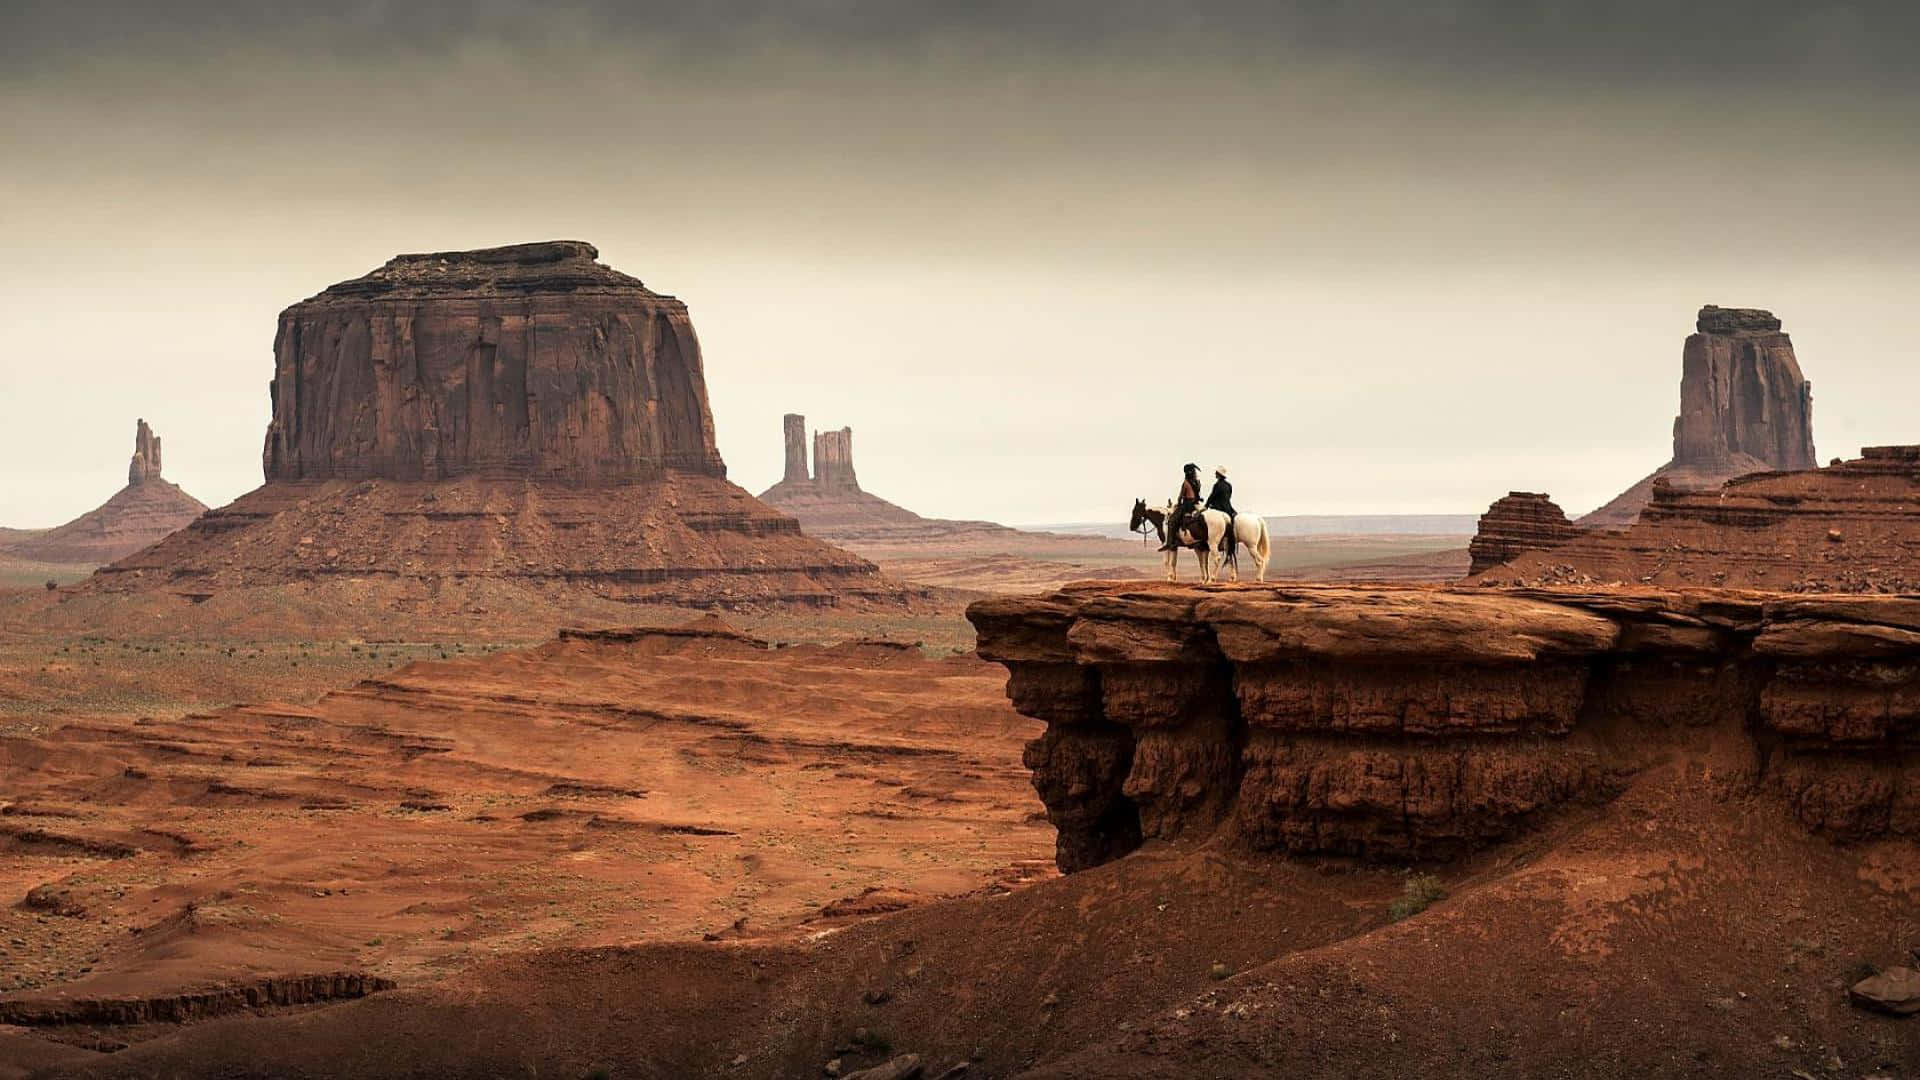 A classic Wild West scene alive with adventure